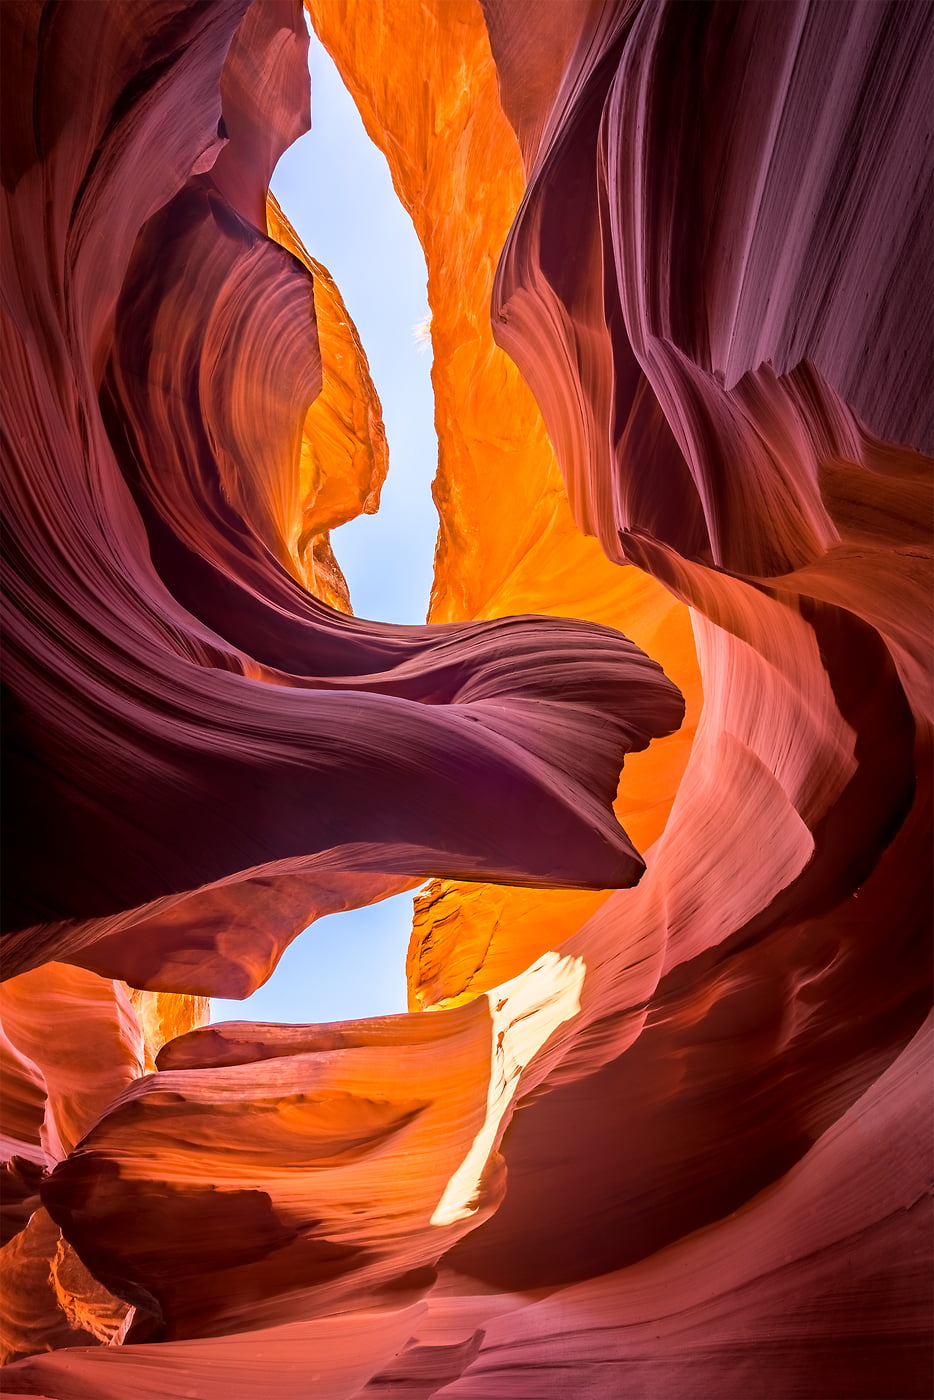 165 megapixels! A very high quality, large-format VAST photo print of Antelope Canyon; fine art nature photo created by Justin Katz in Arizona